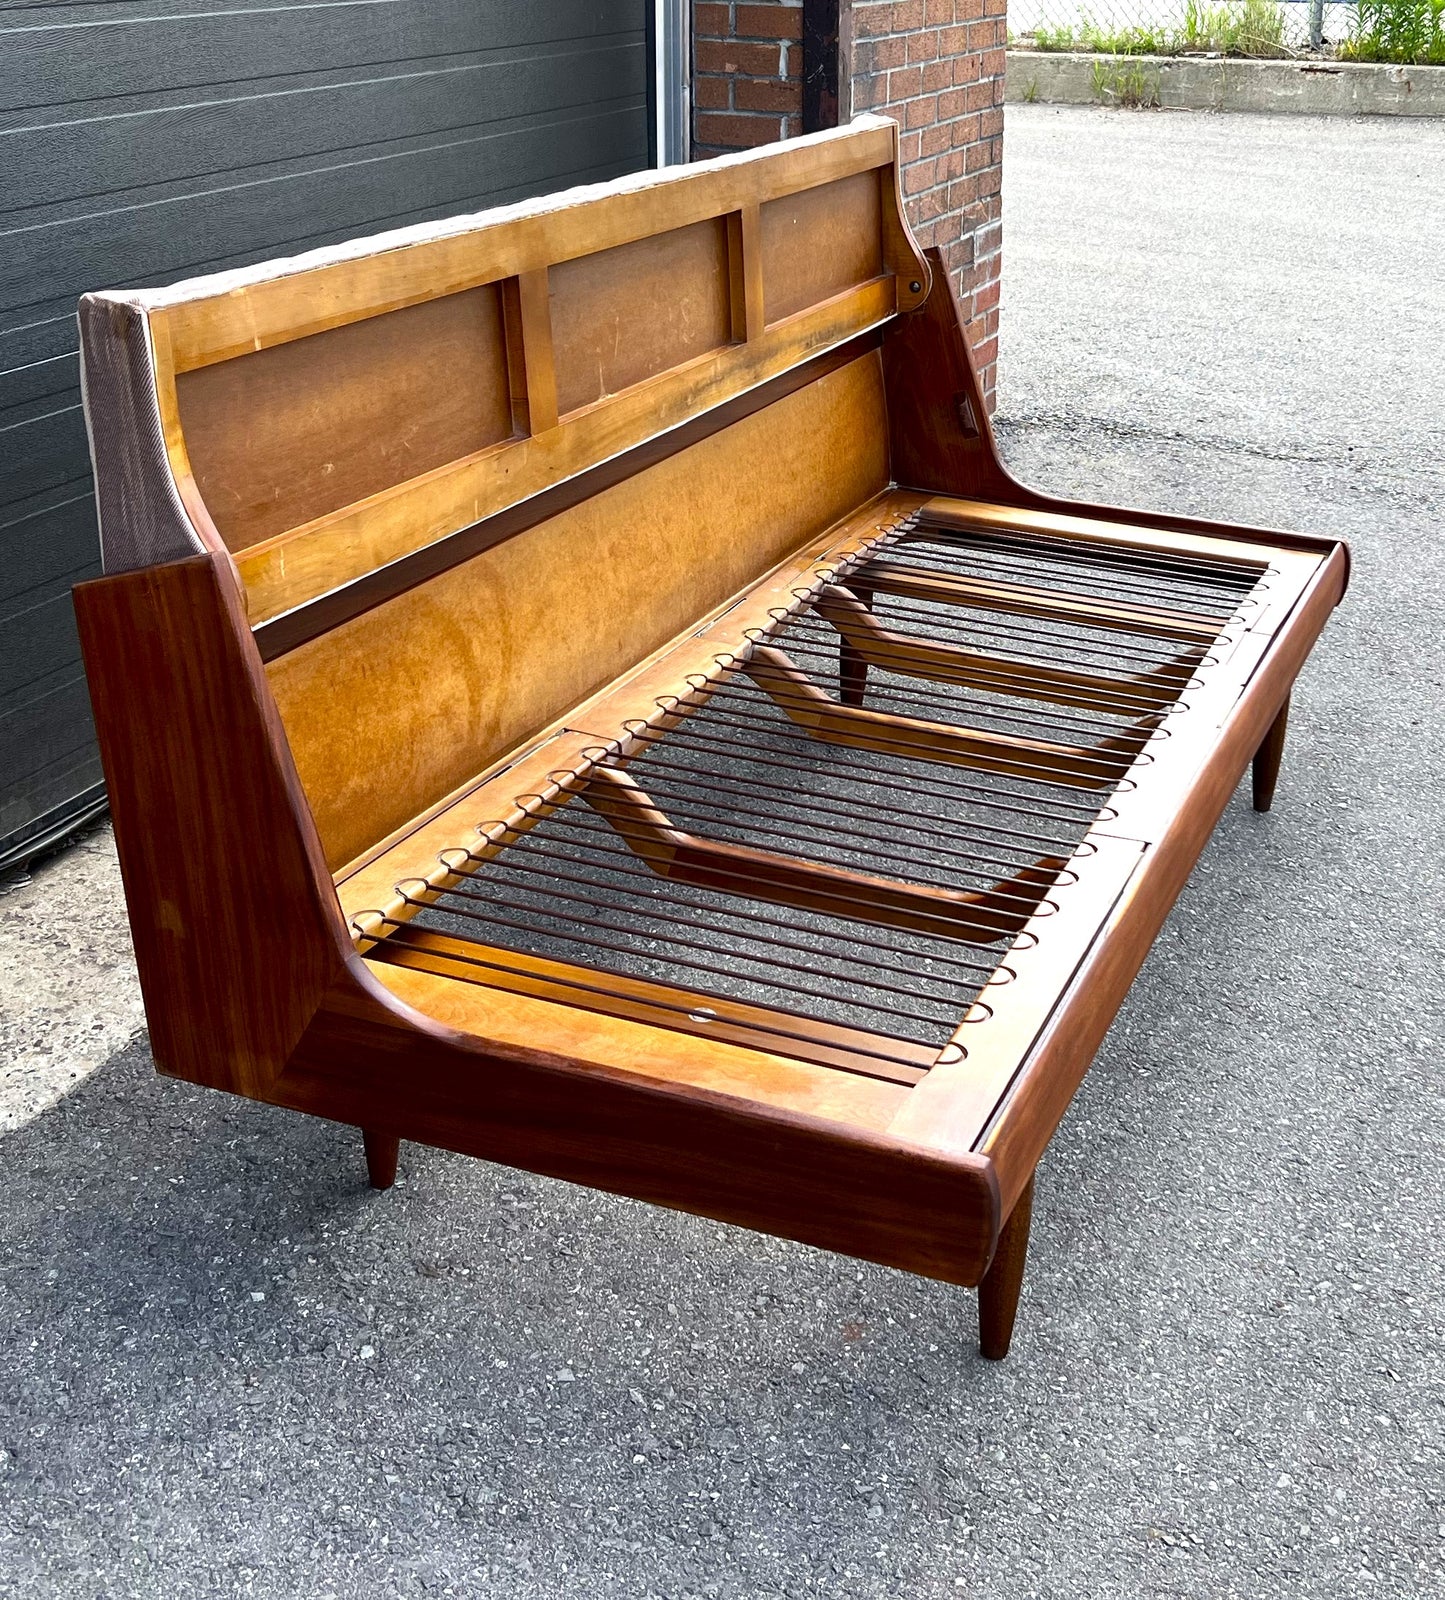 REFINISHED  Mid Century Modern Teak Sofa - Bed, can be REUPHOLSTERED